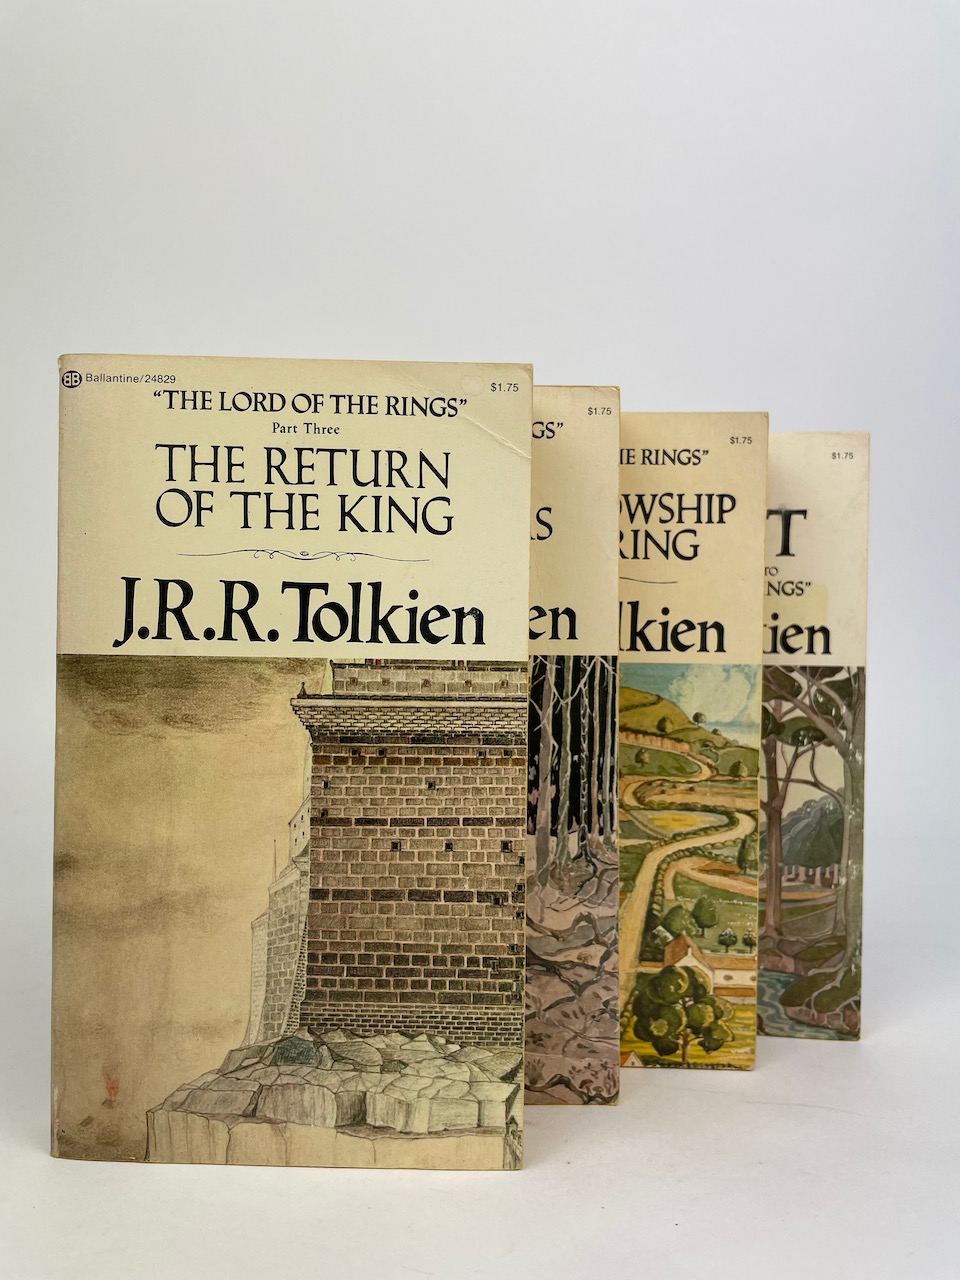 The Hobbit and The Lord of the Rings, Four Paperback Book Boxset from 1975, Gold Slipcase 16